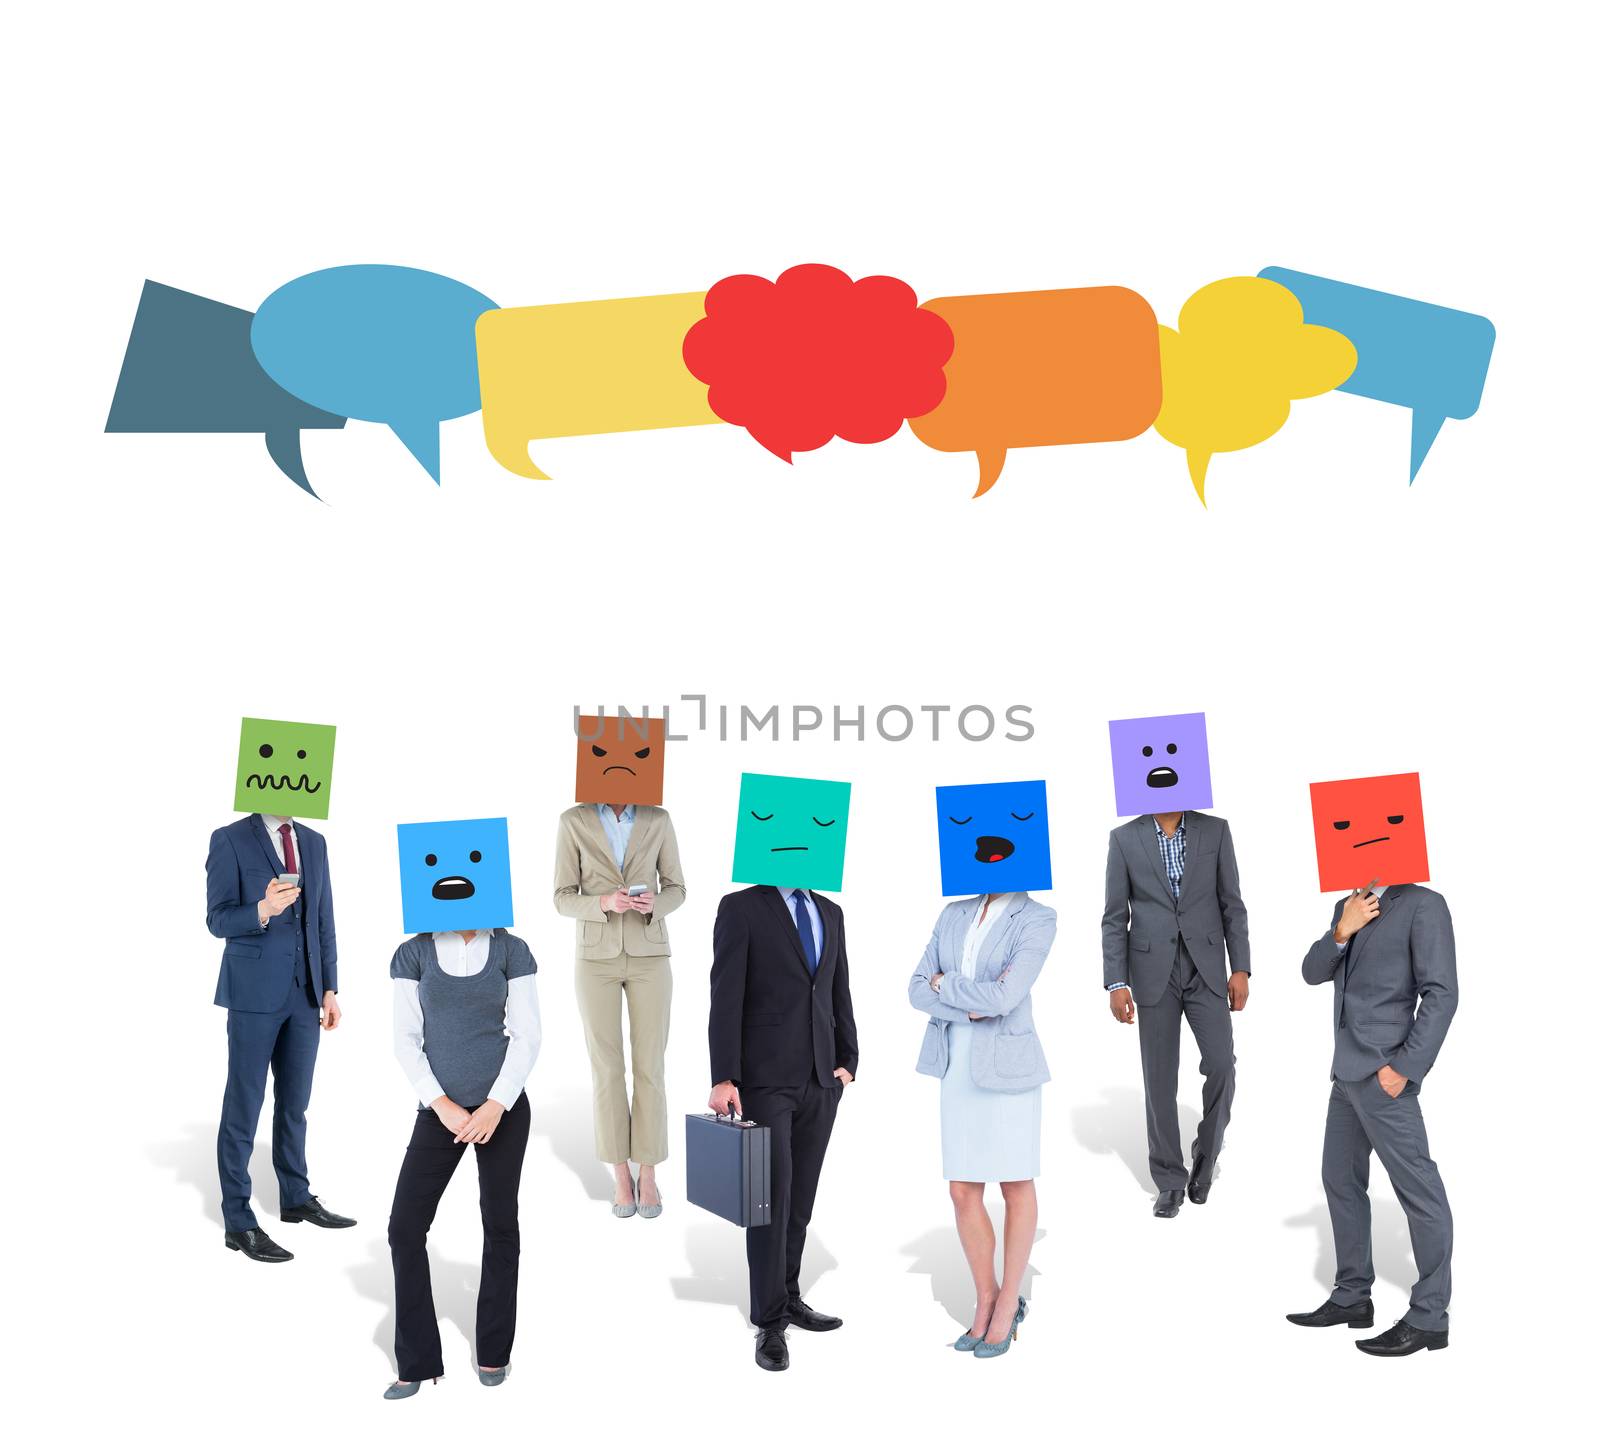 Composite image of people with boxes on their heads by Wavebreakmedia